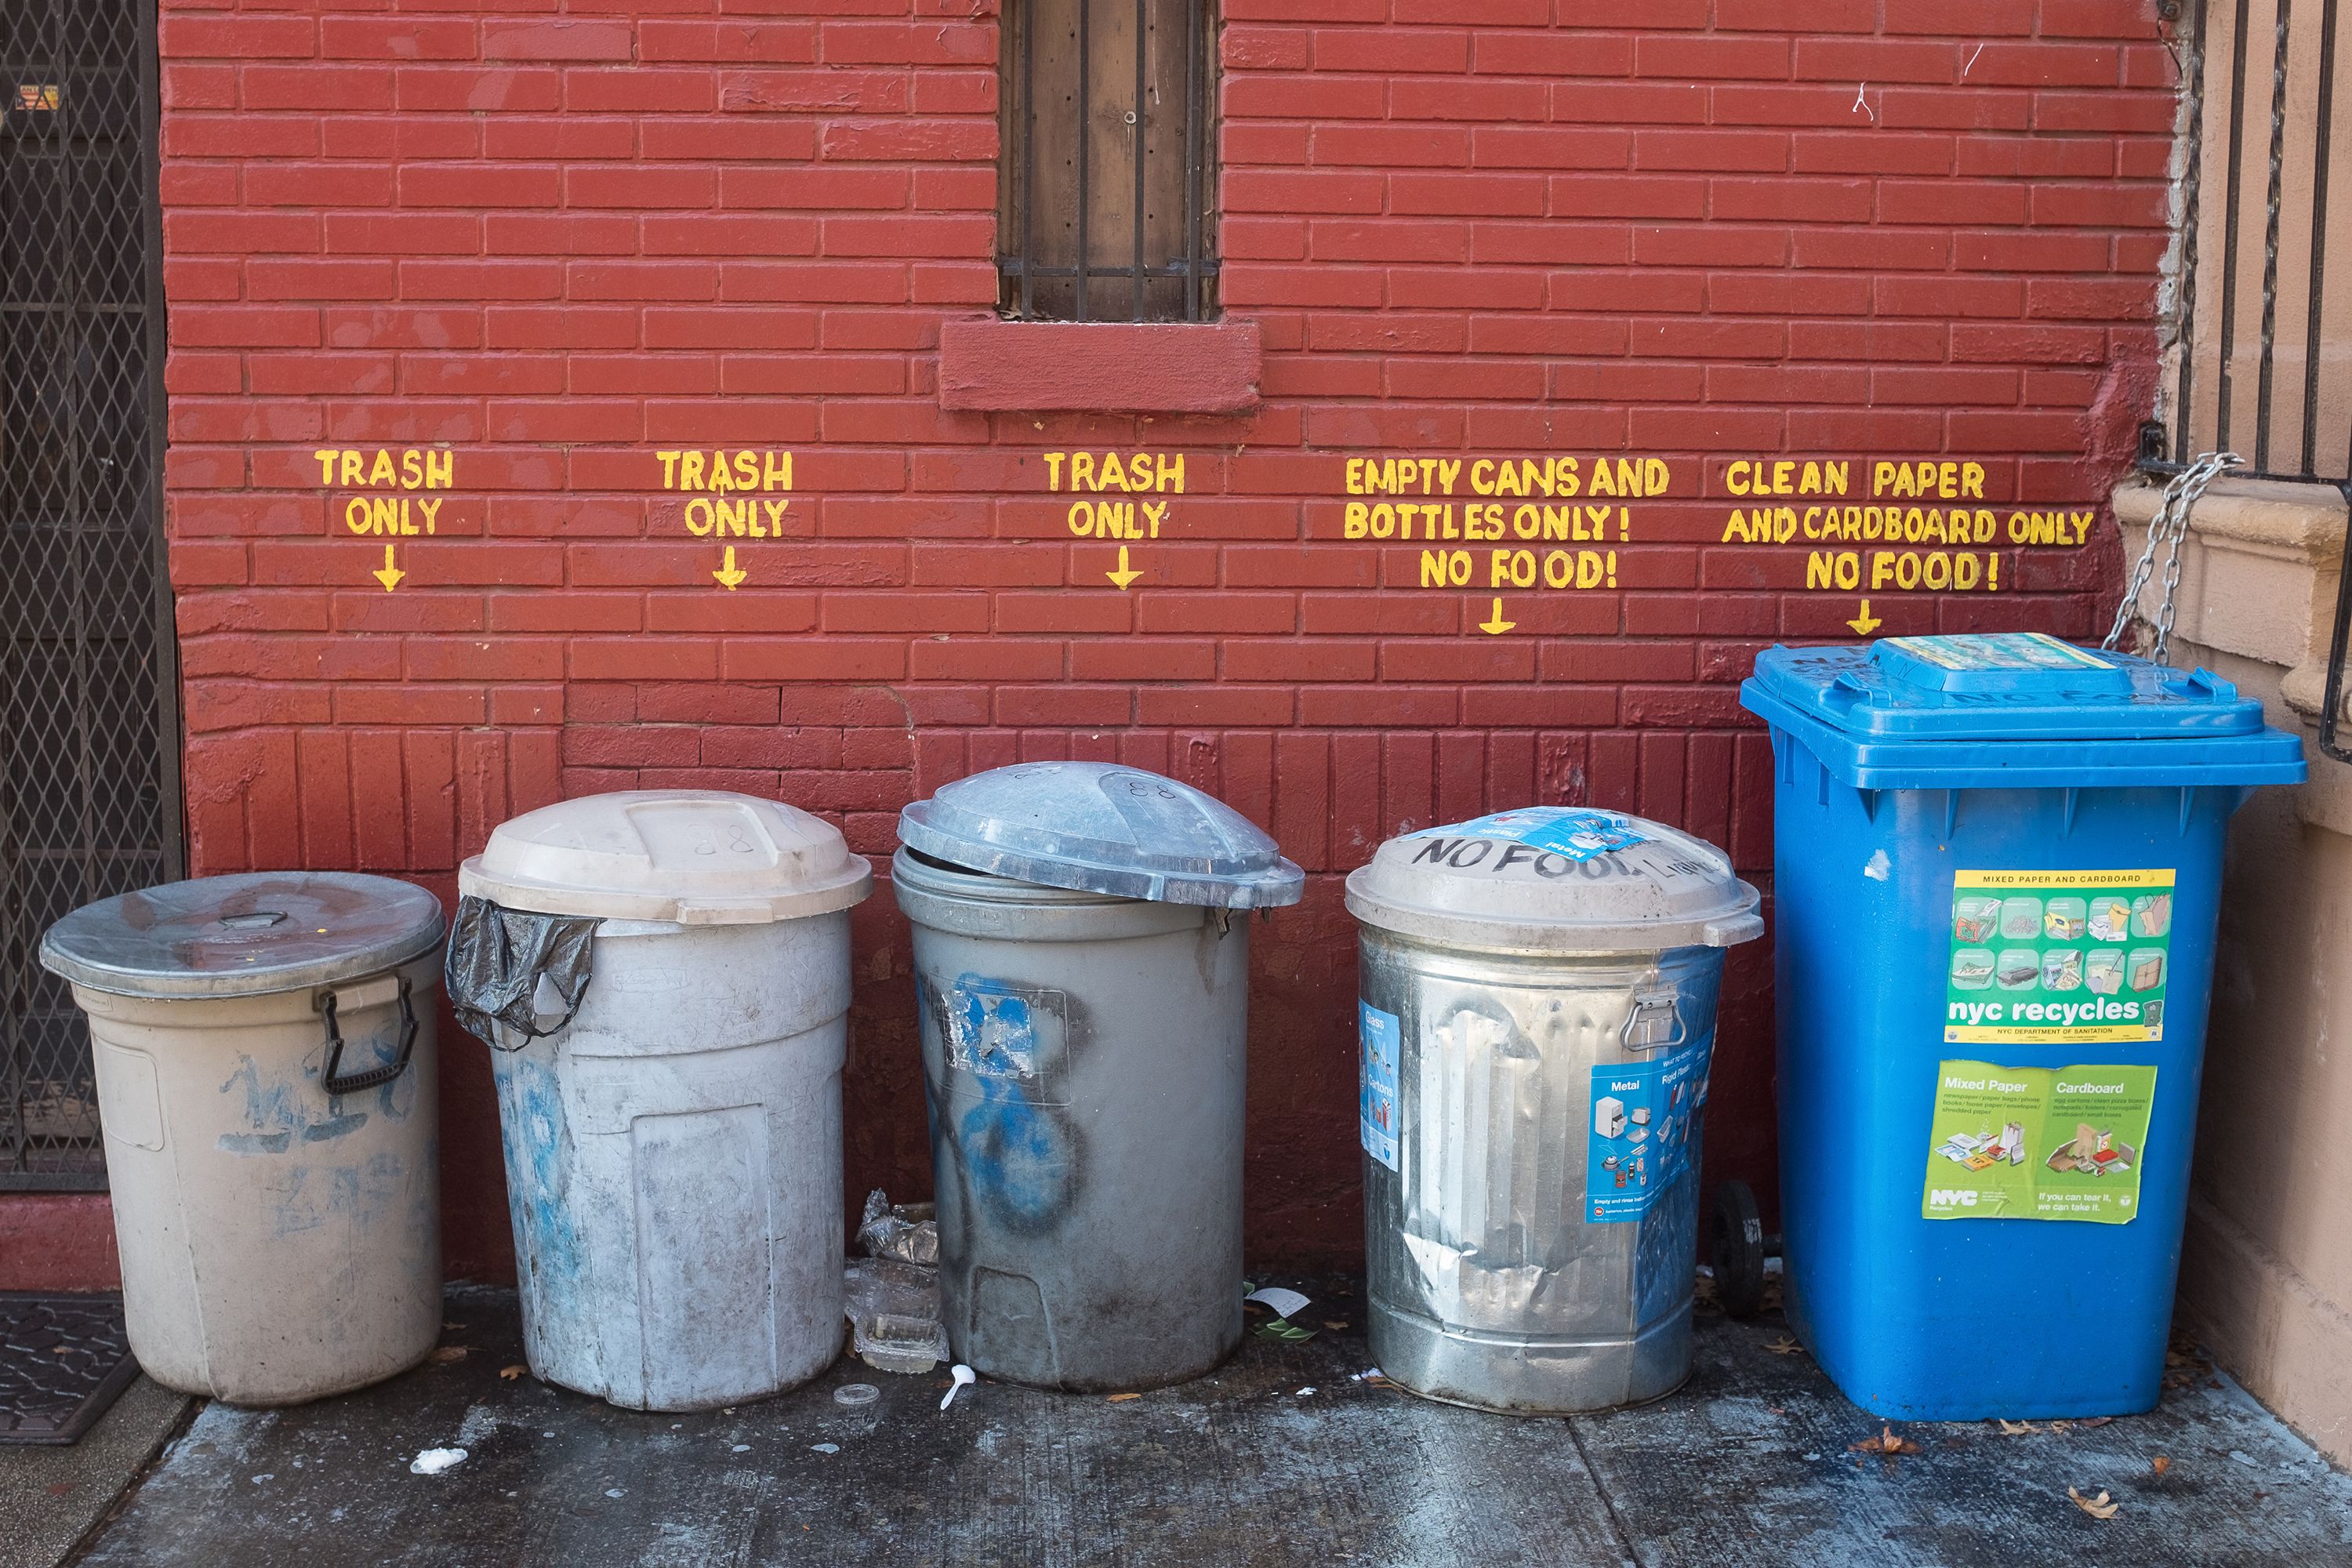 https://pyxis.nymag.com/v1/imgs/cbe/697/4090d82f40b9628a6510d2427d25bcd739-container-trash.jpg